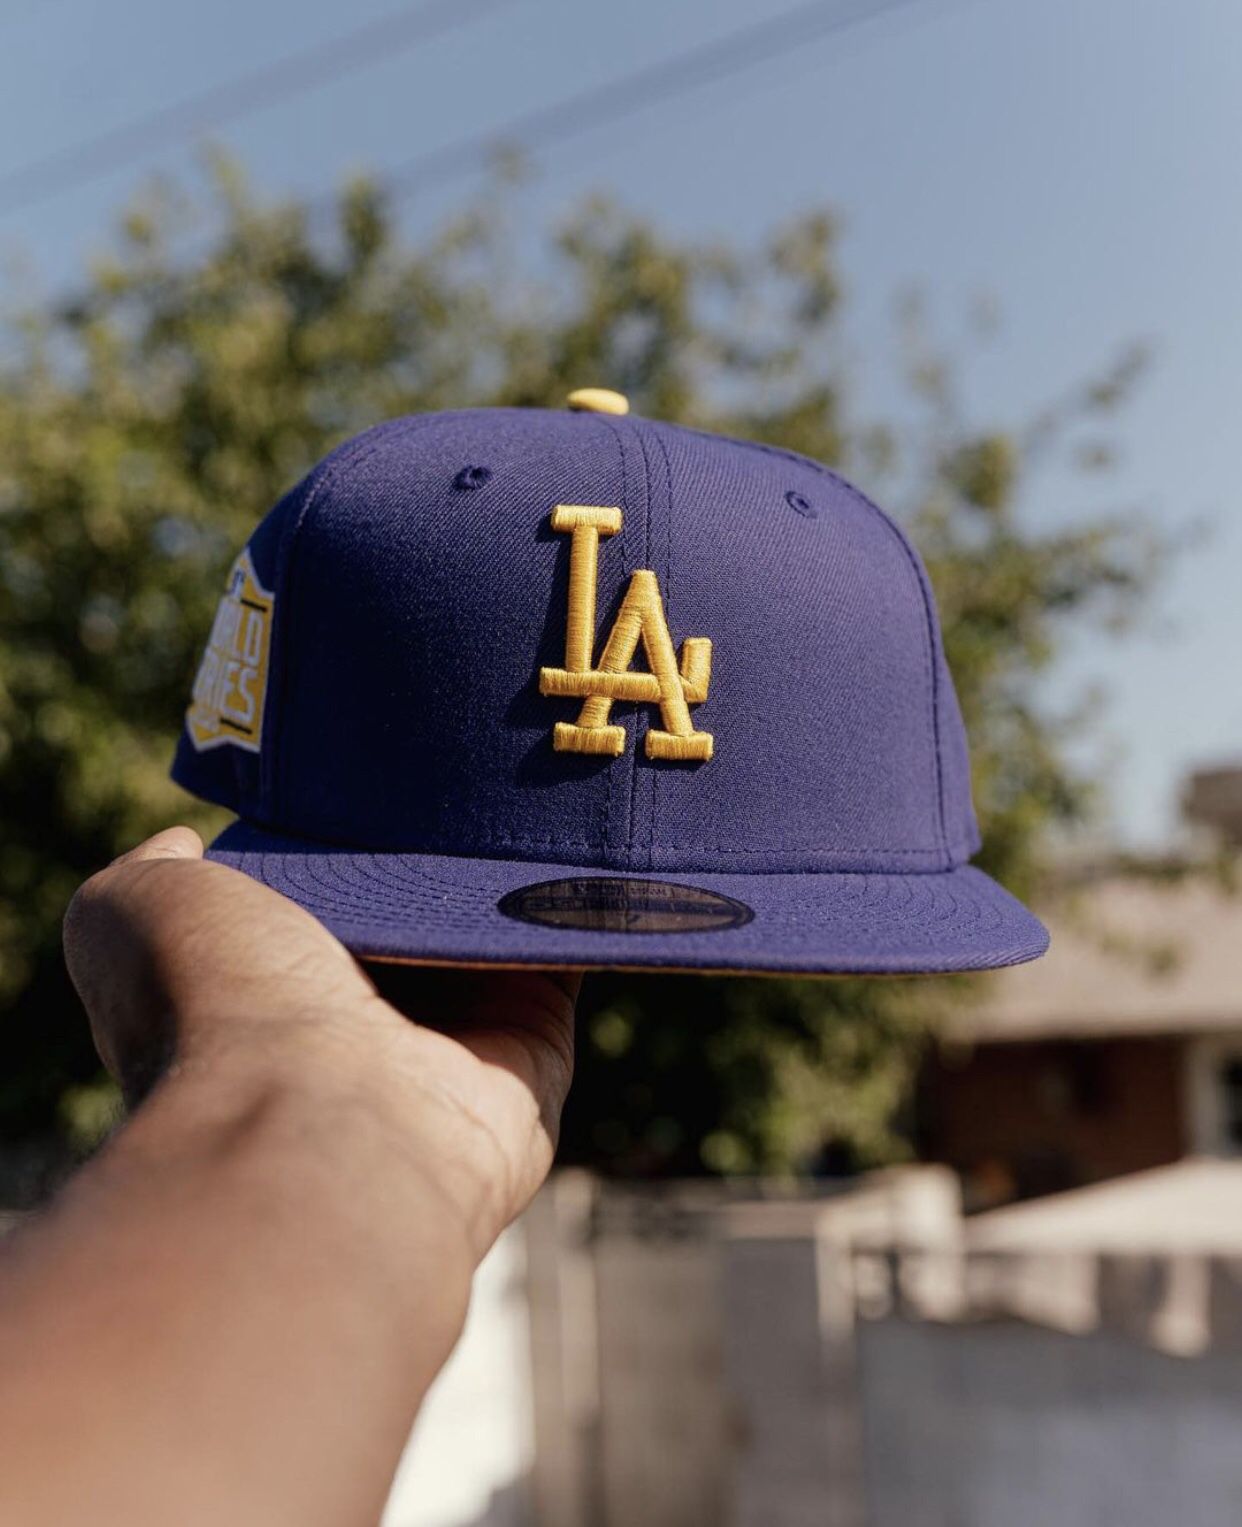 Smooth operator 👀 Shop the New Era x MLB Full Satin 59FIFTY Collection now  - in select stores.